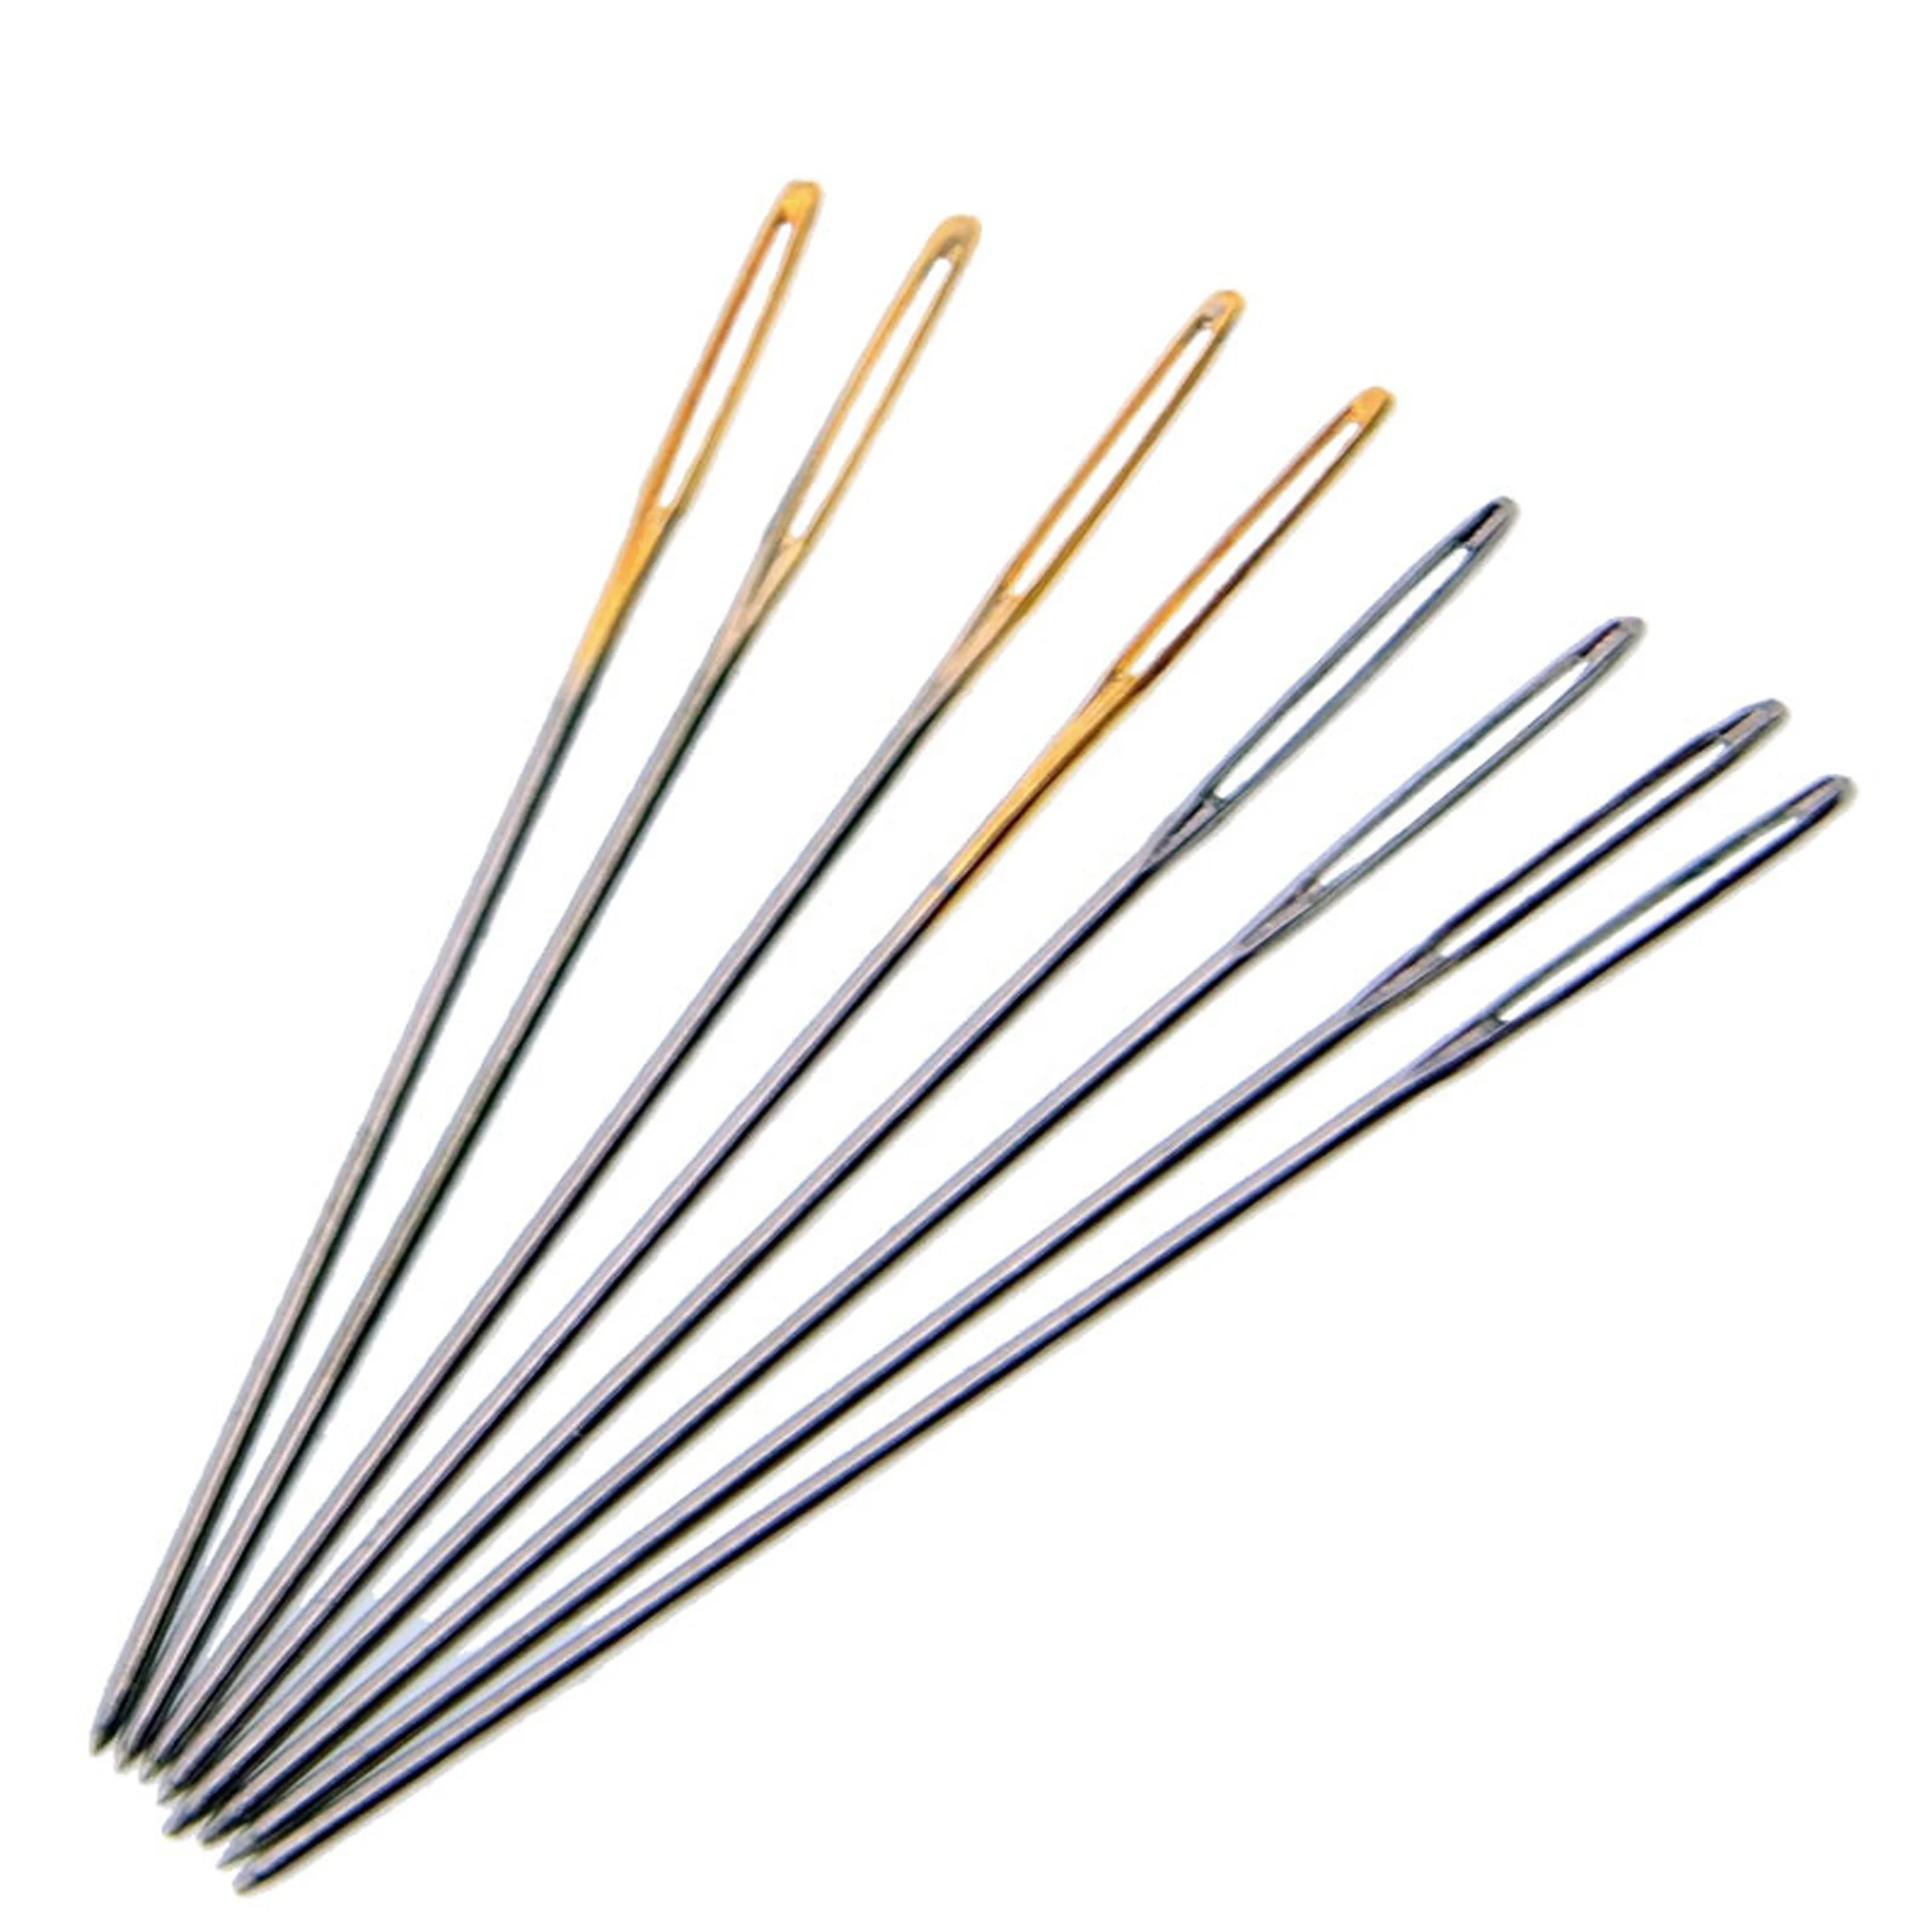 Biynpbe 30pcs Large Eye Cross Stitch/Embroidery Hand Needles for DIY Embroider Craft Size 26